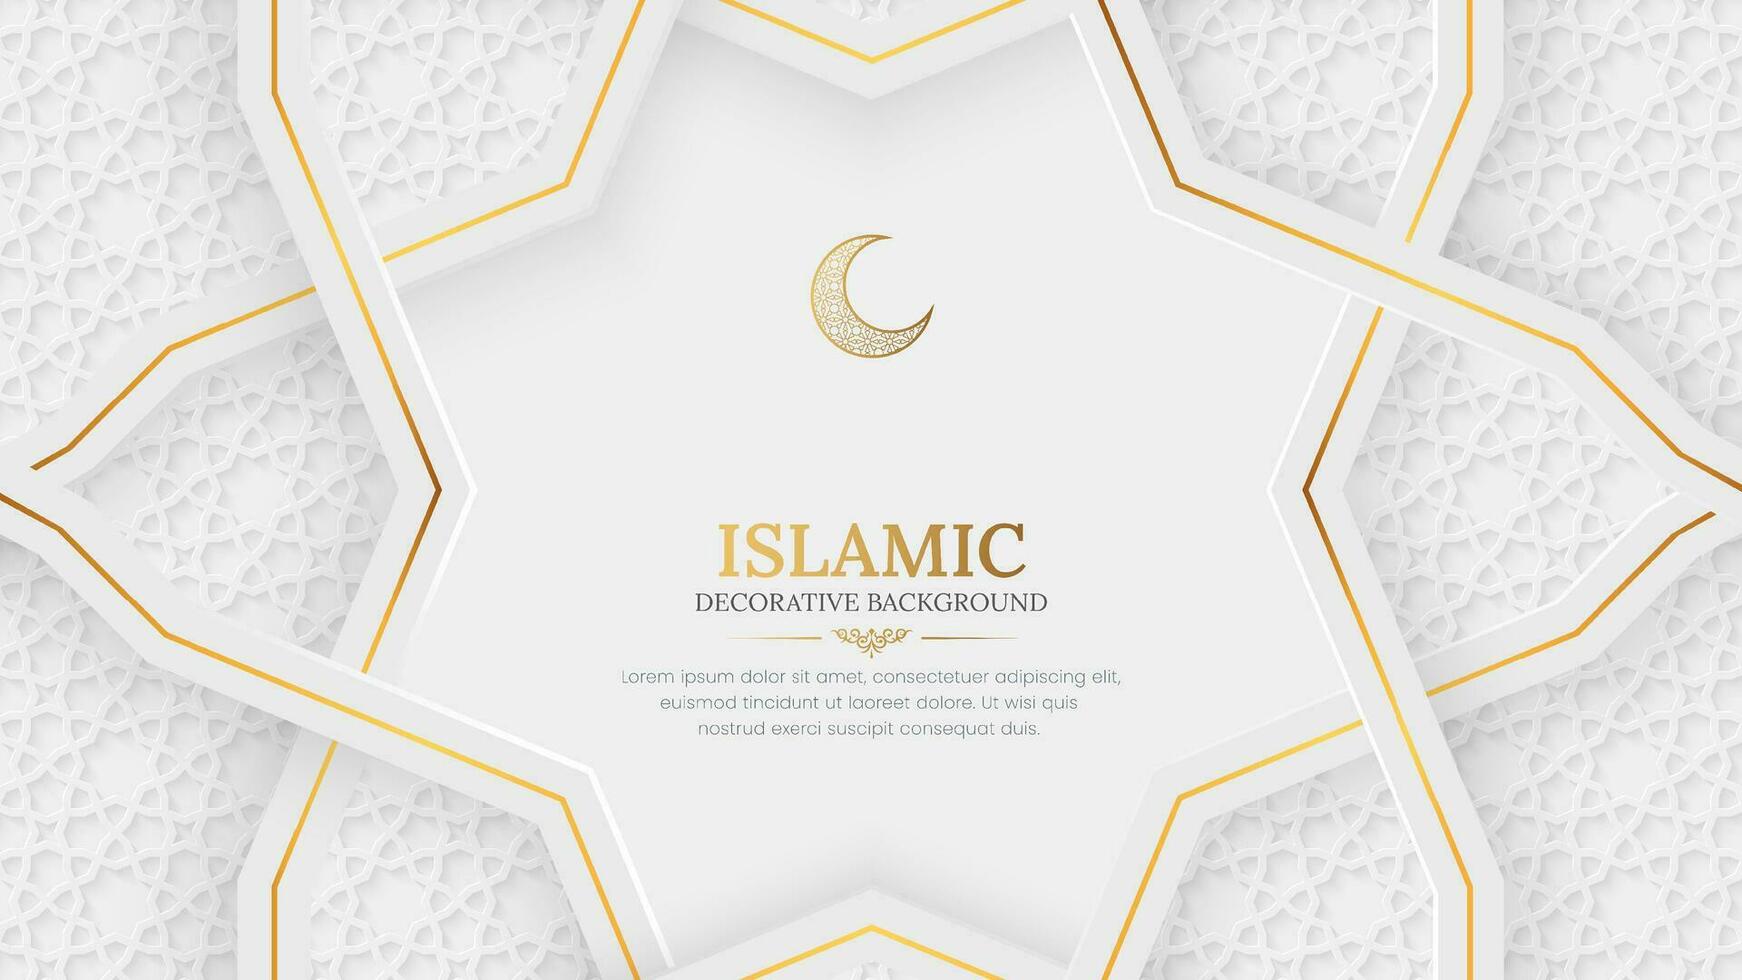 Arabic Islamic Elegant White and Golden Luxury Ornamental Background with Islamic Pattern and Decorative Ornament Border Frame vector